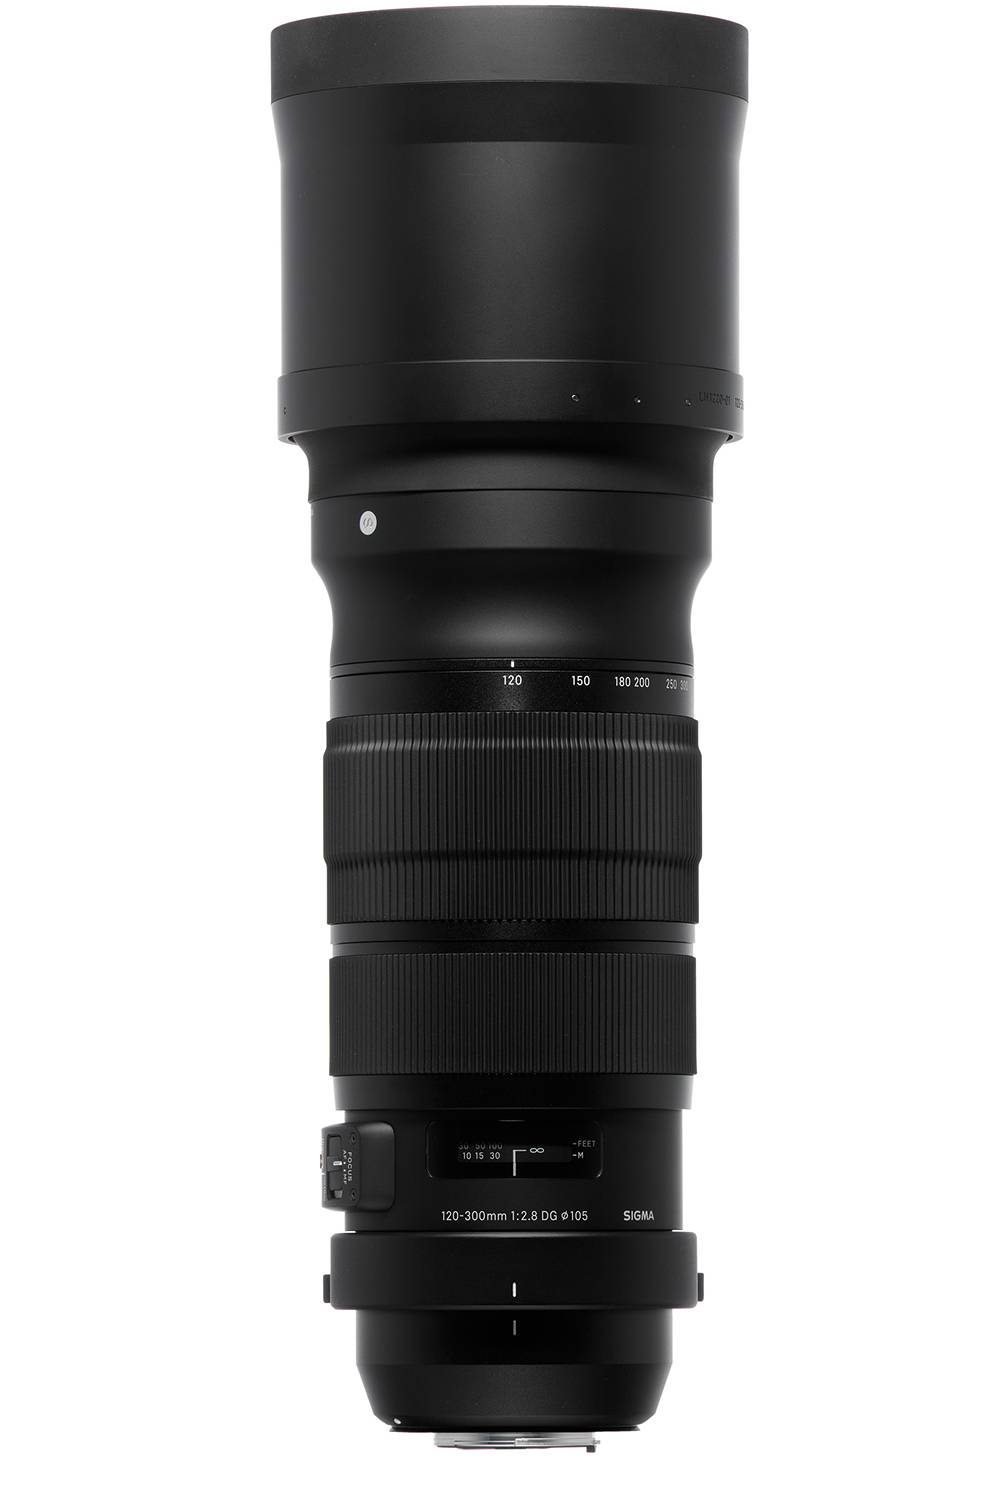 Sigma 120-300mm f/2.8 DG OS APO HSM Lens for Canon EF